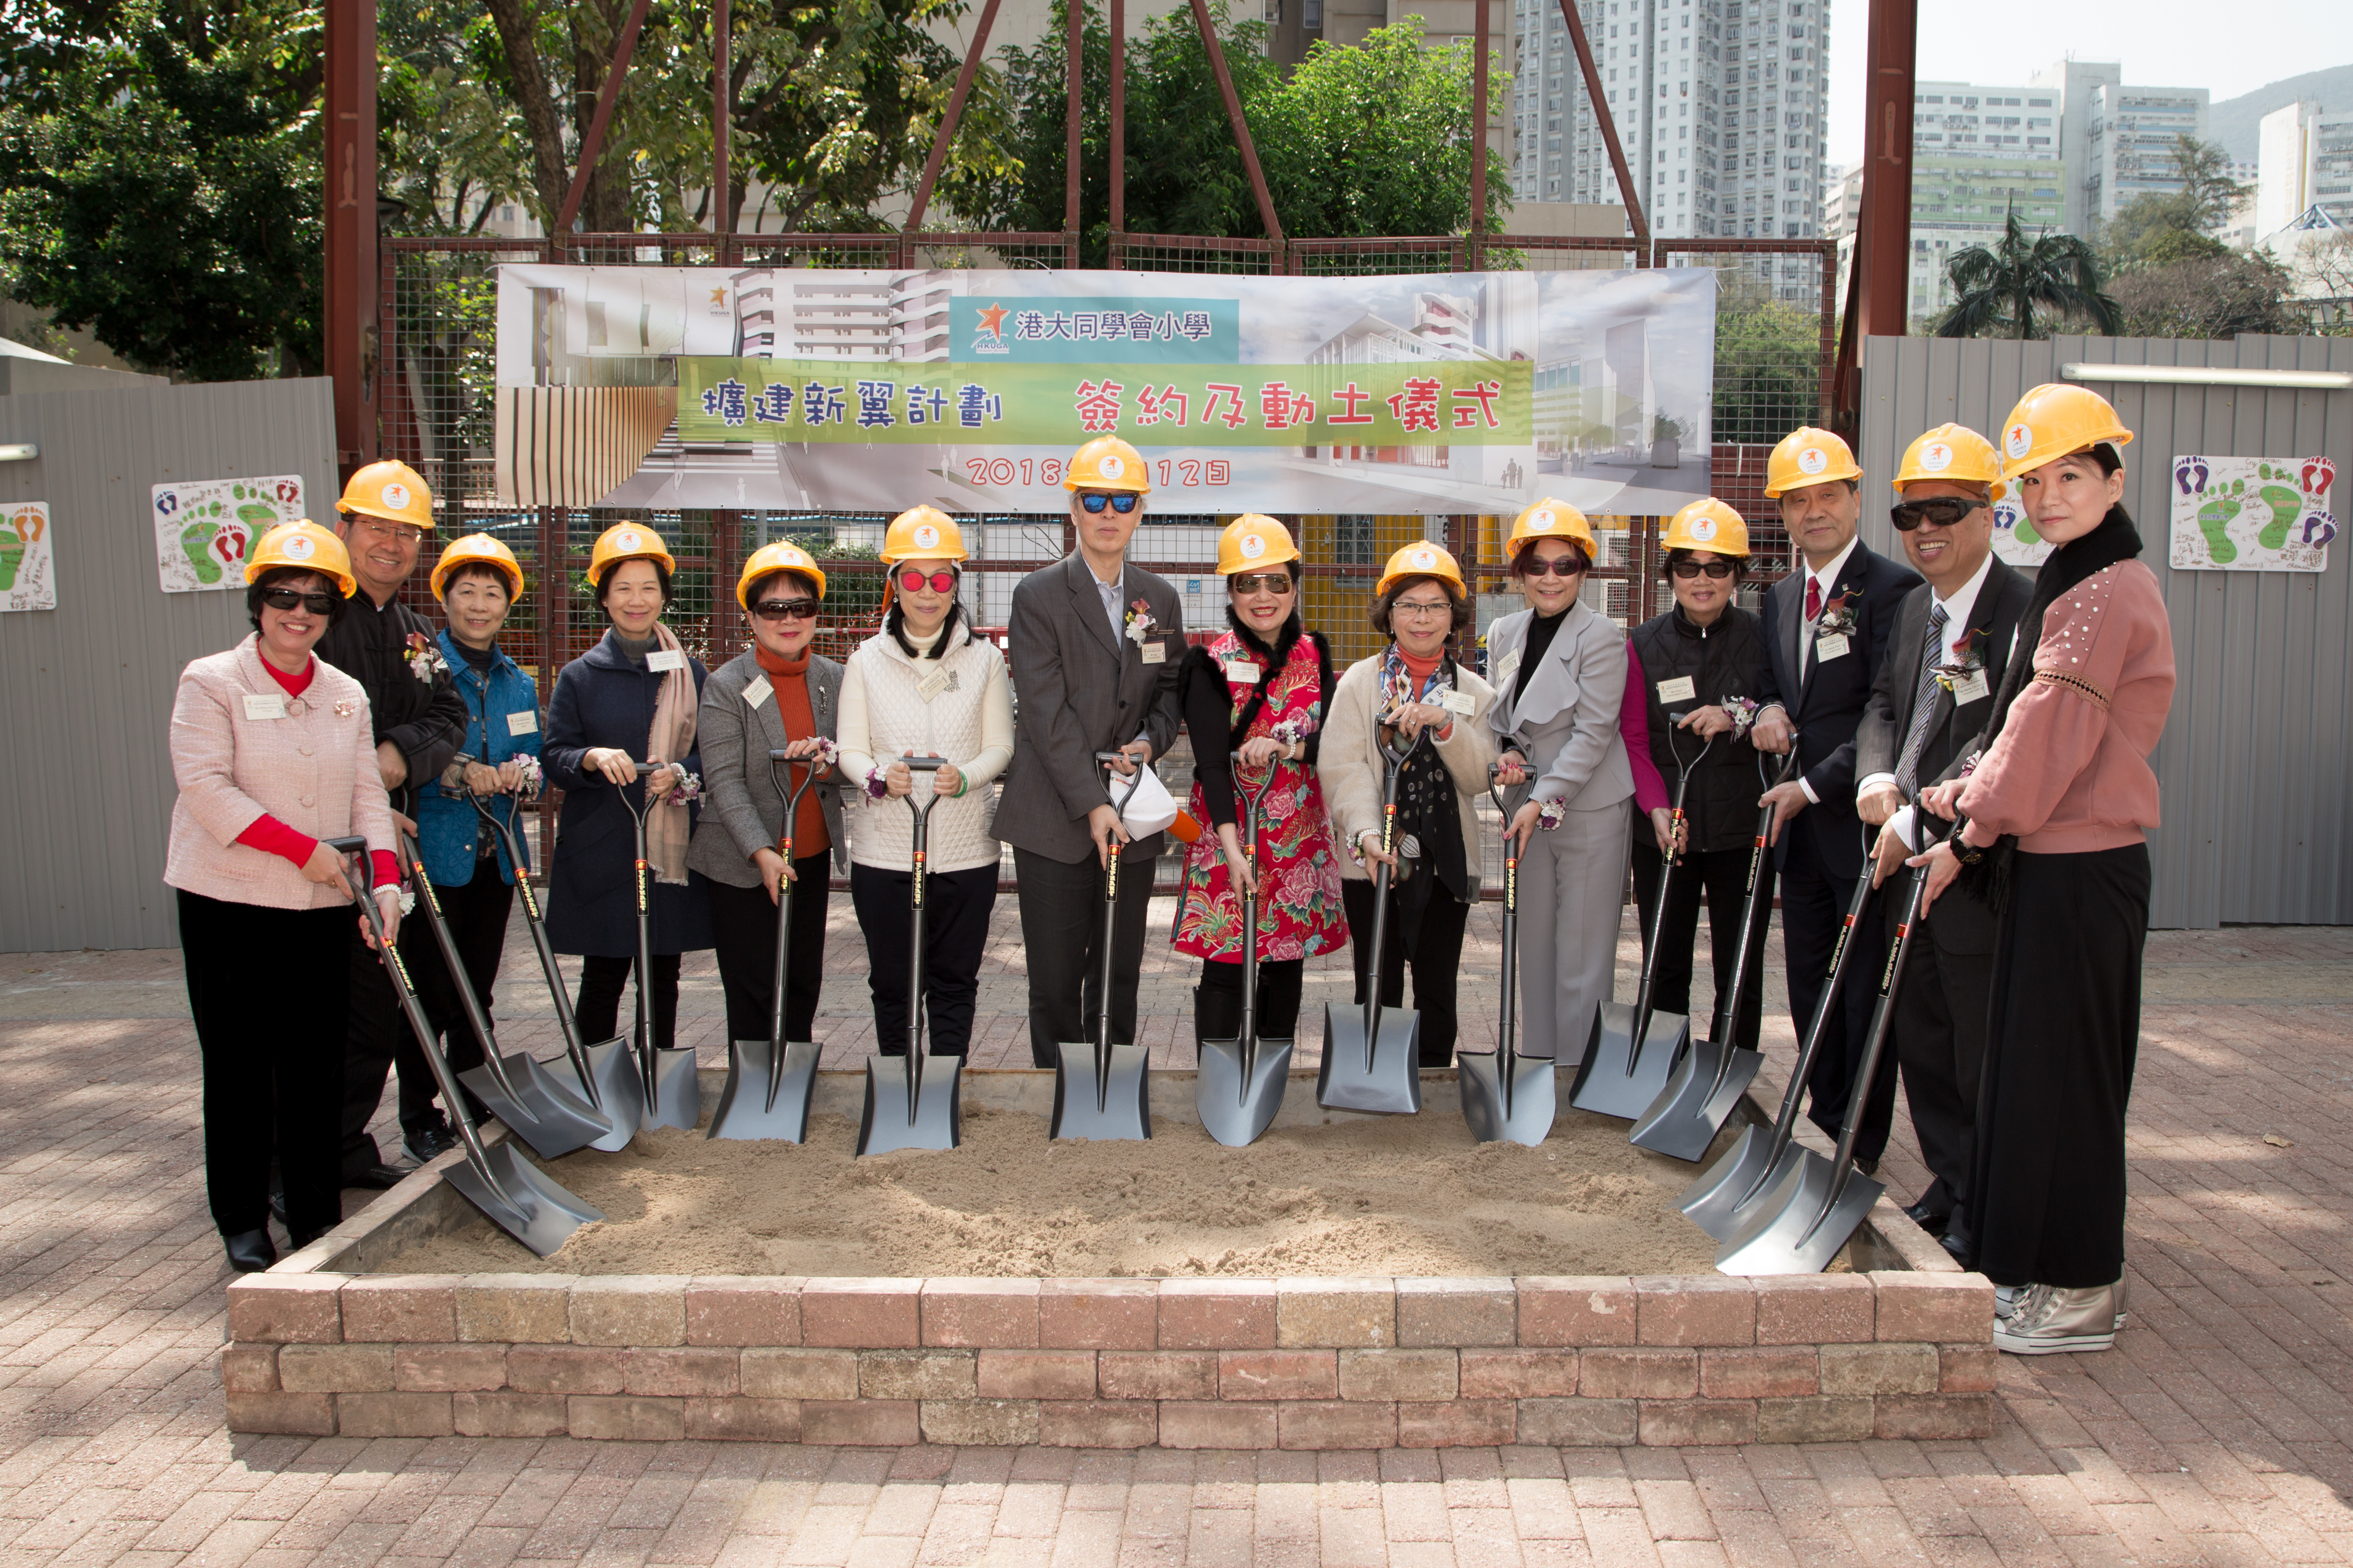 Our guests gathered together for the groundbreaking ceremony to officially commence the construction of the new wing